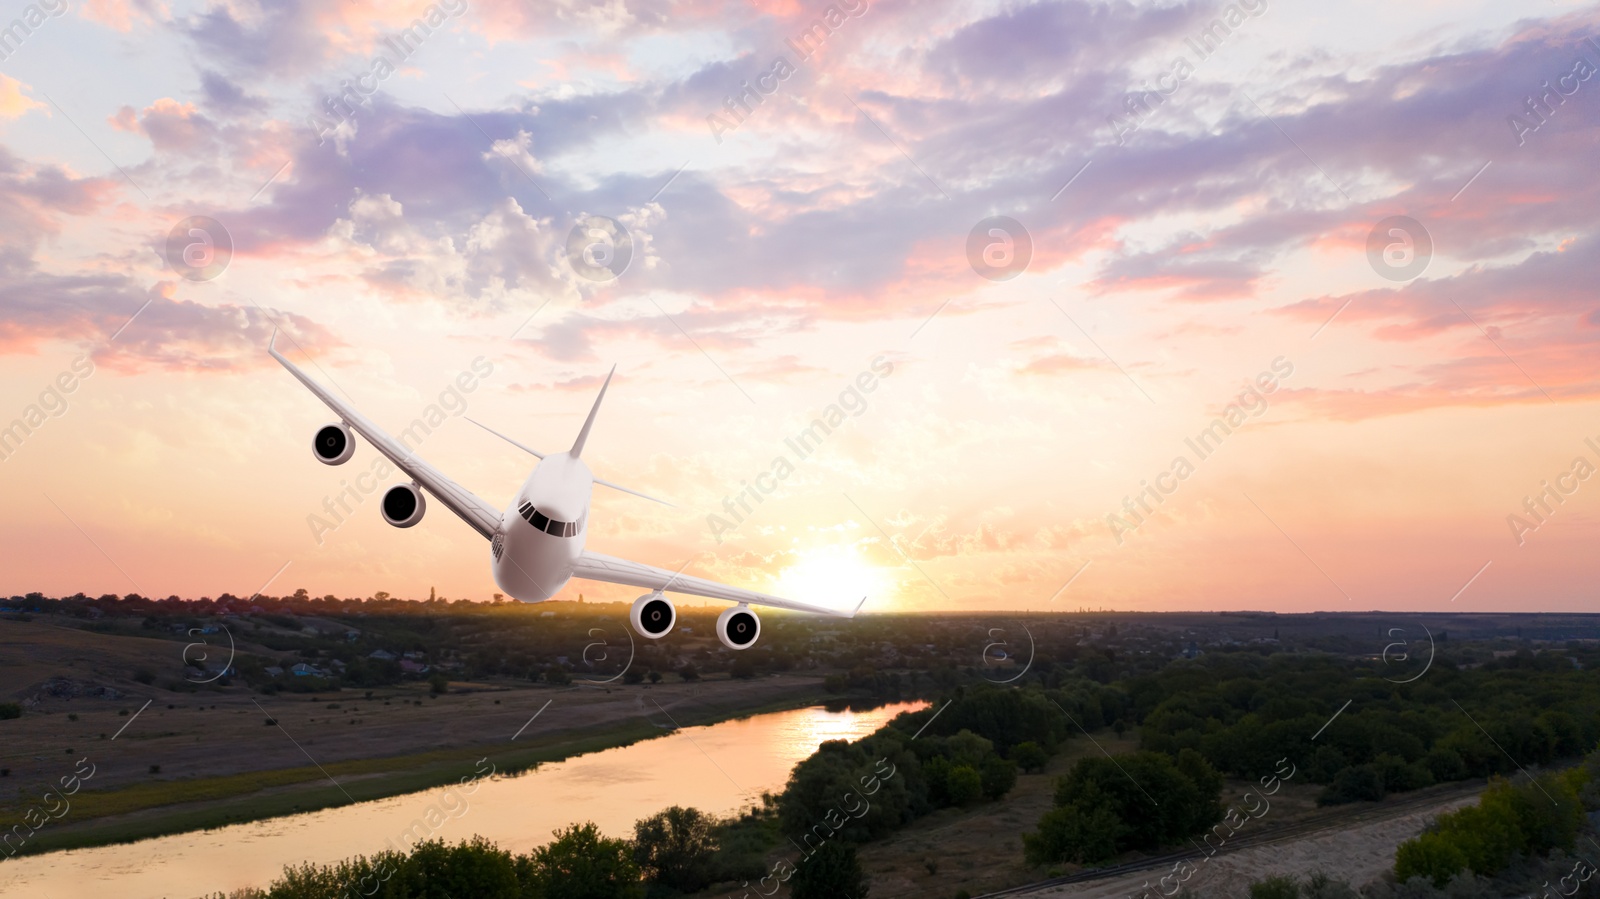 Image of Modern airplane flying in sky during sunset